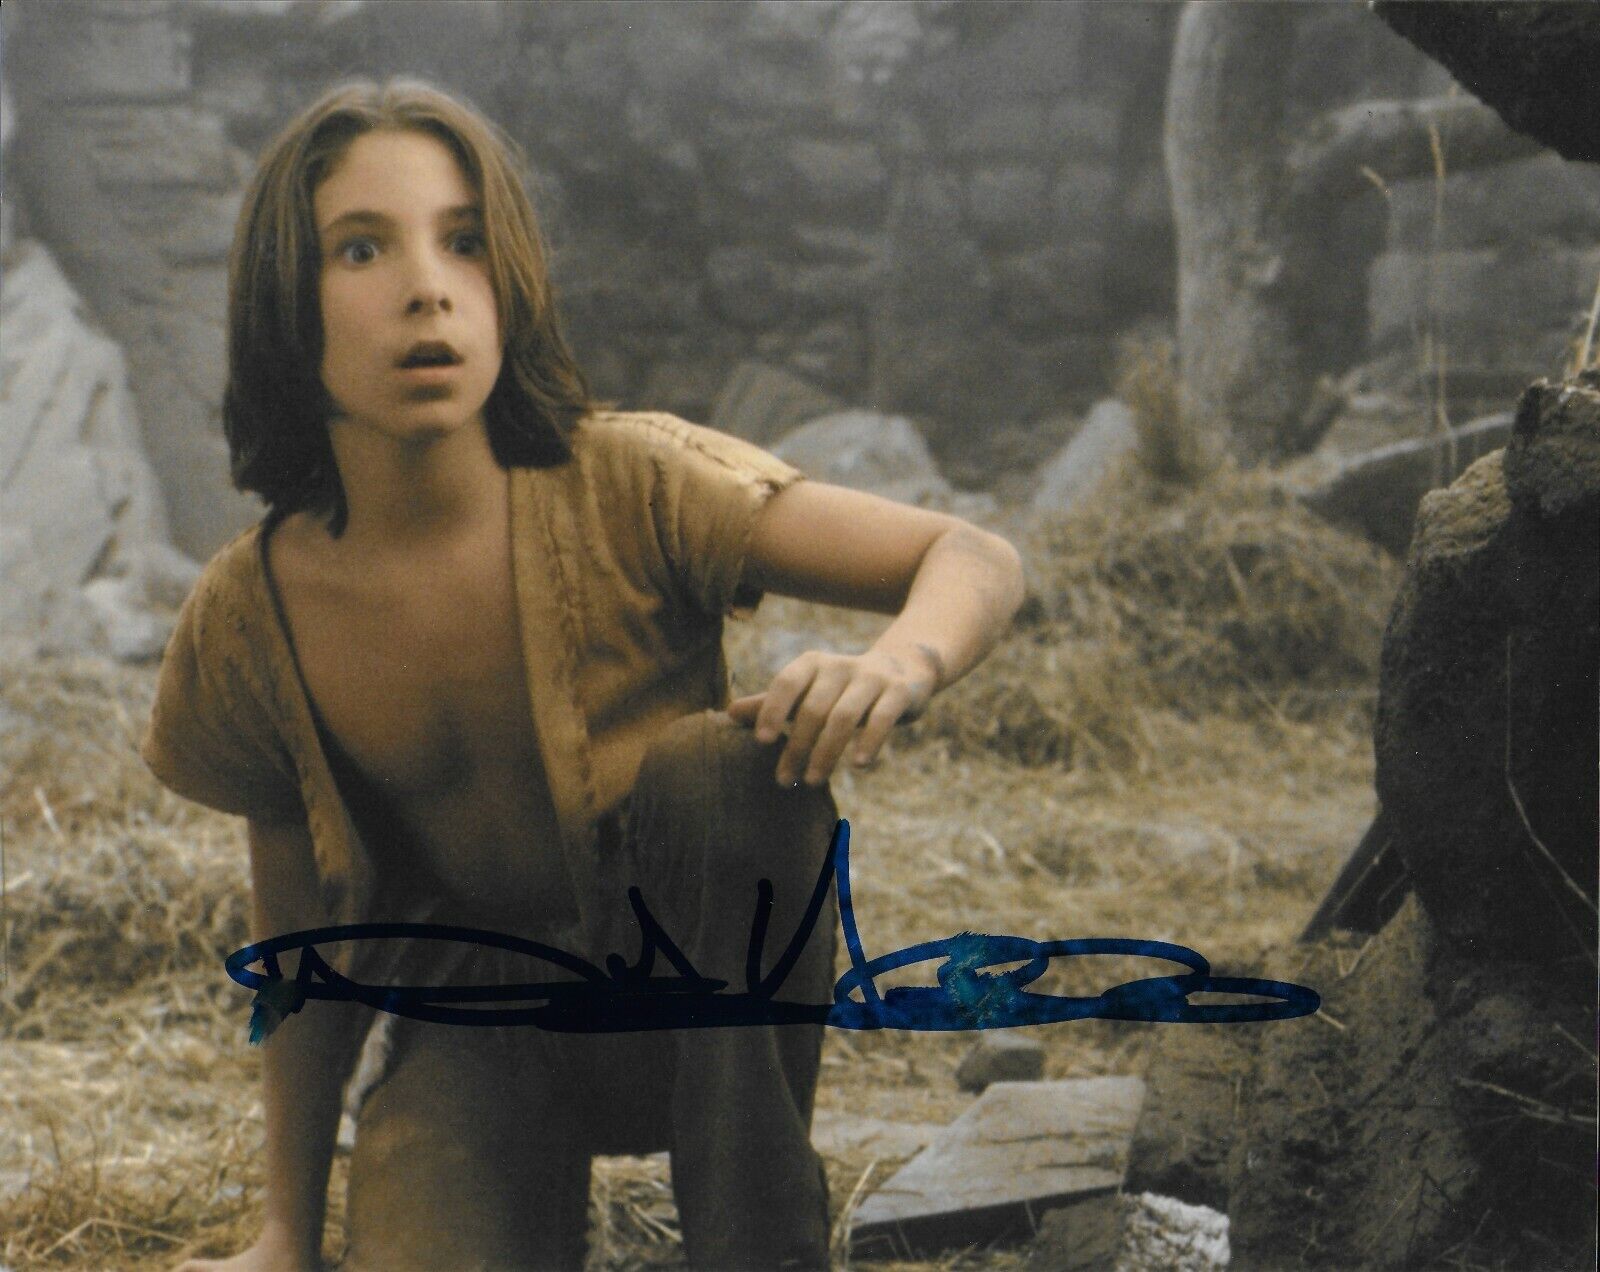 Noah Hathaway NeverEnding Original Autographed 8X10 Photo Poster painting (slightly smudged) SP